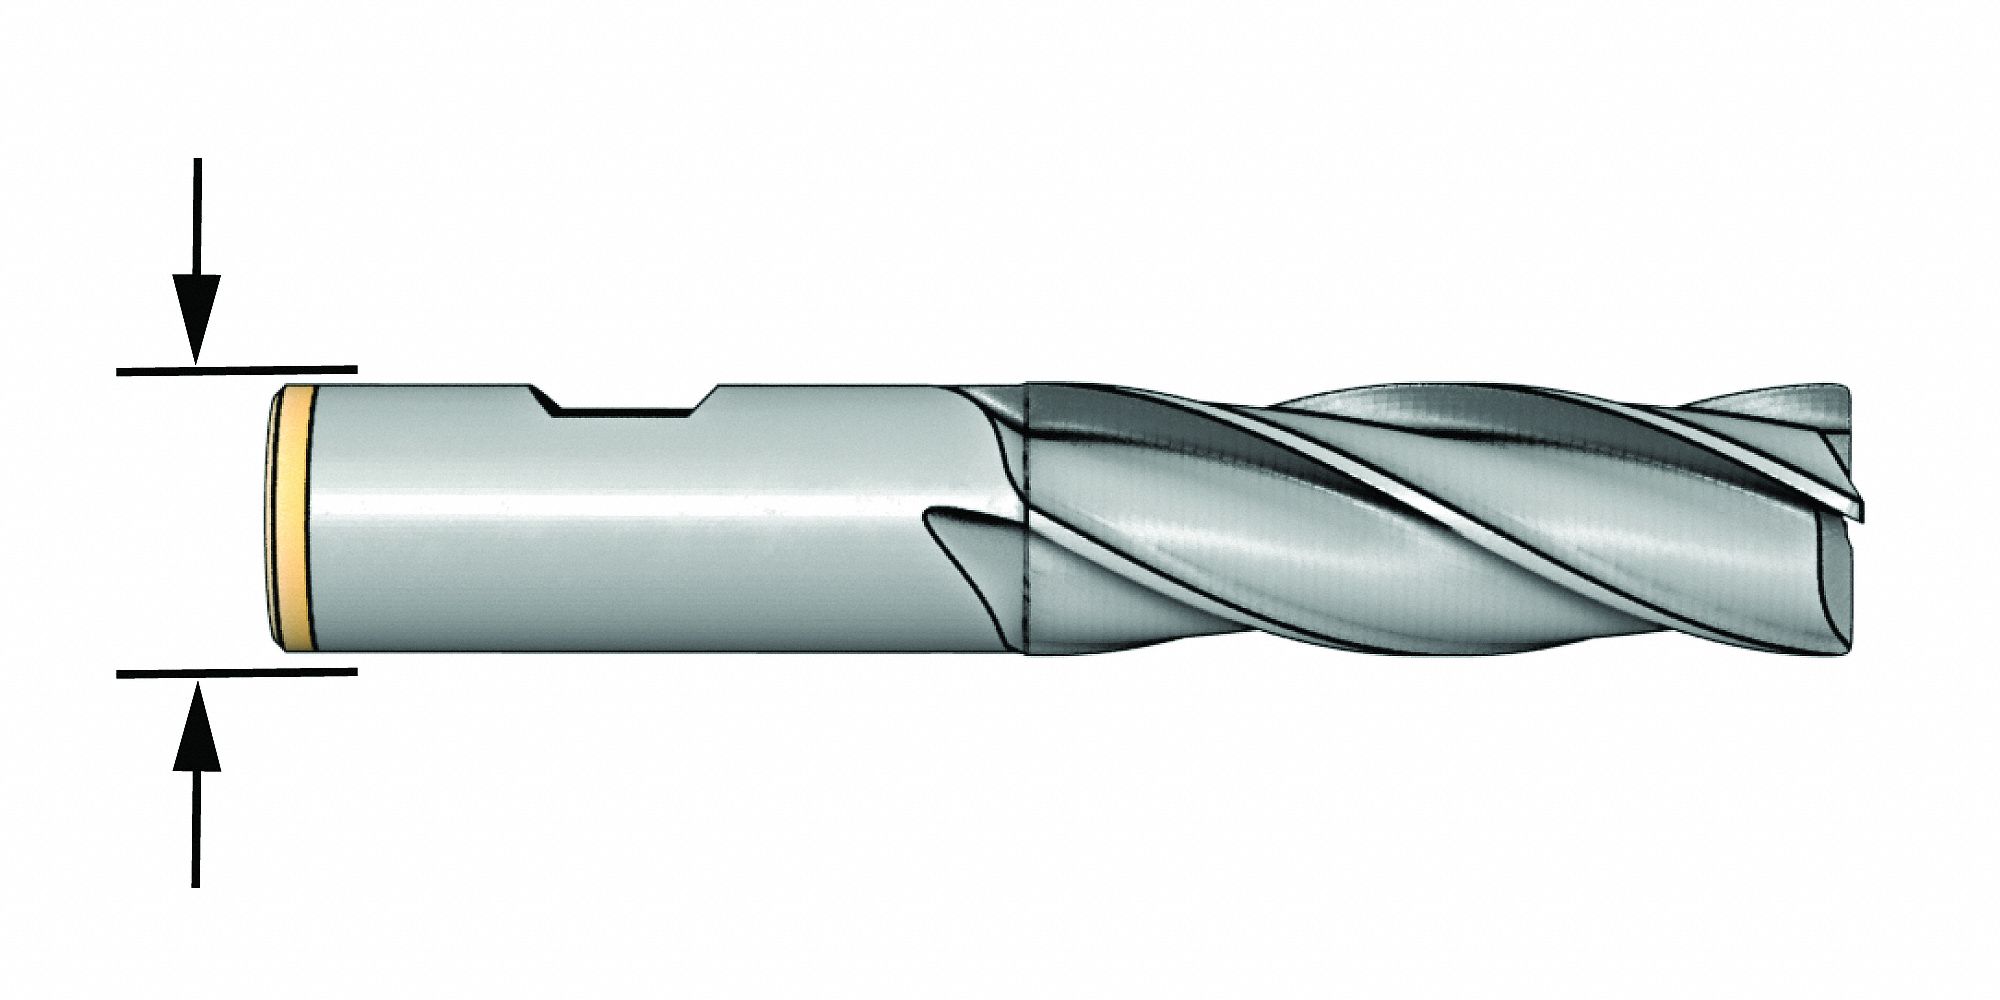 Cleveland C33457 HG-4C High Speed Steel Single End Multi-Flute Center Cutting Finisher End Mill 